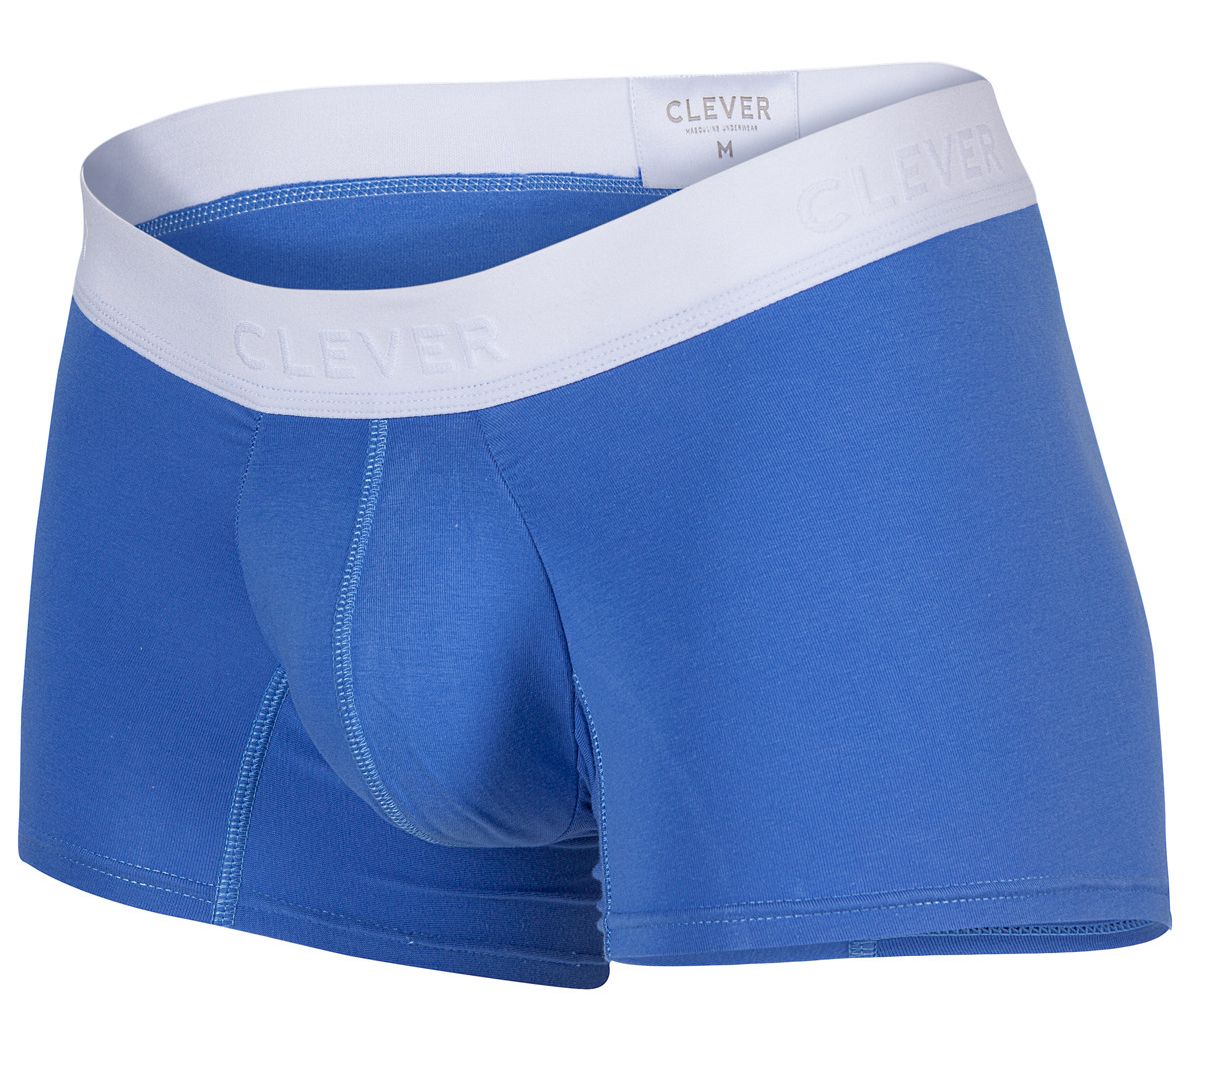 Clever Tethis Trunk Trunks- CITYBOYZ★USA